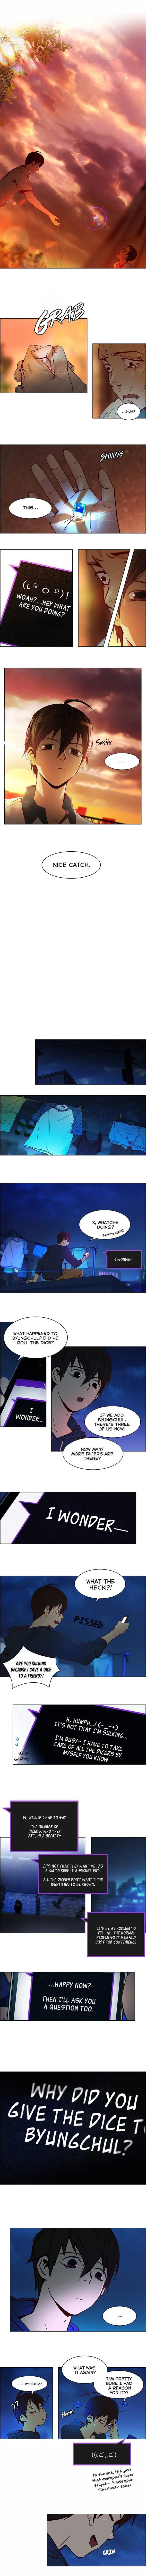 DICE: The Cube That Changes Everything Chapter 10 page 3